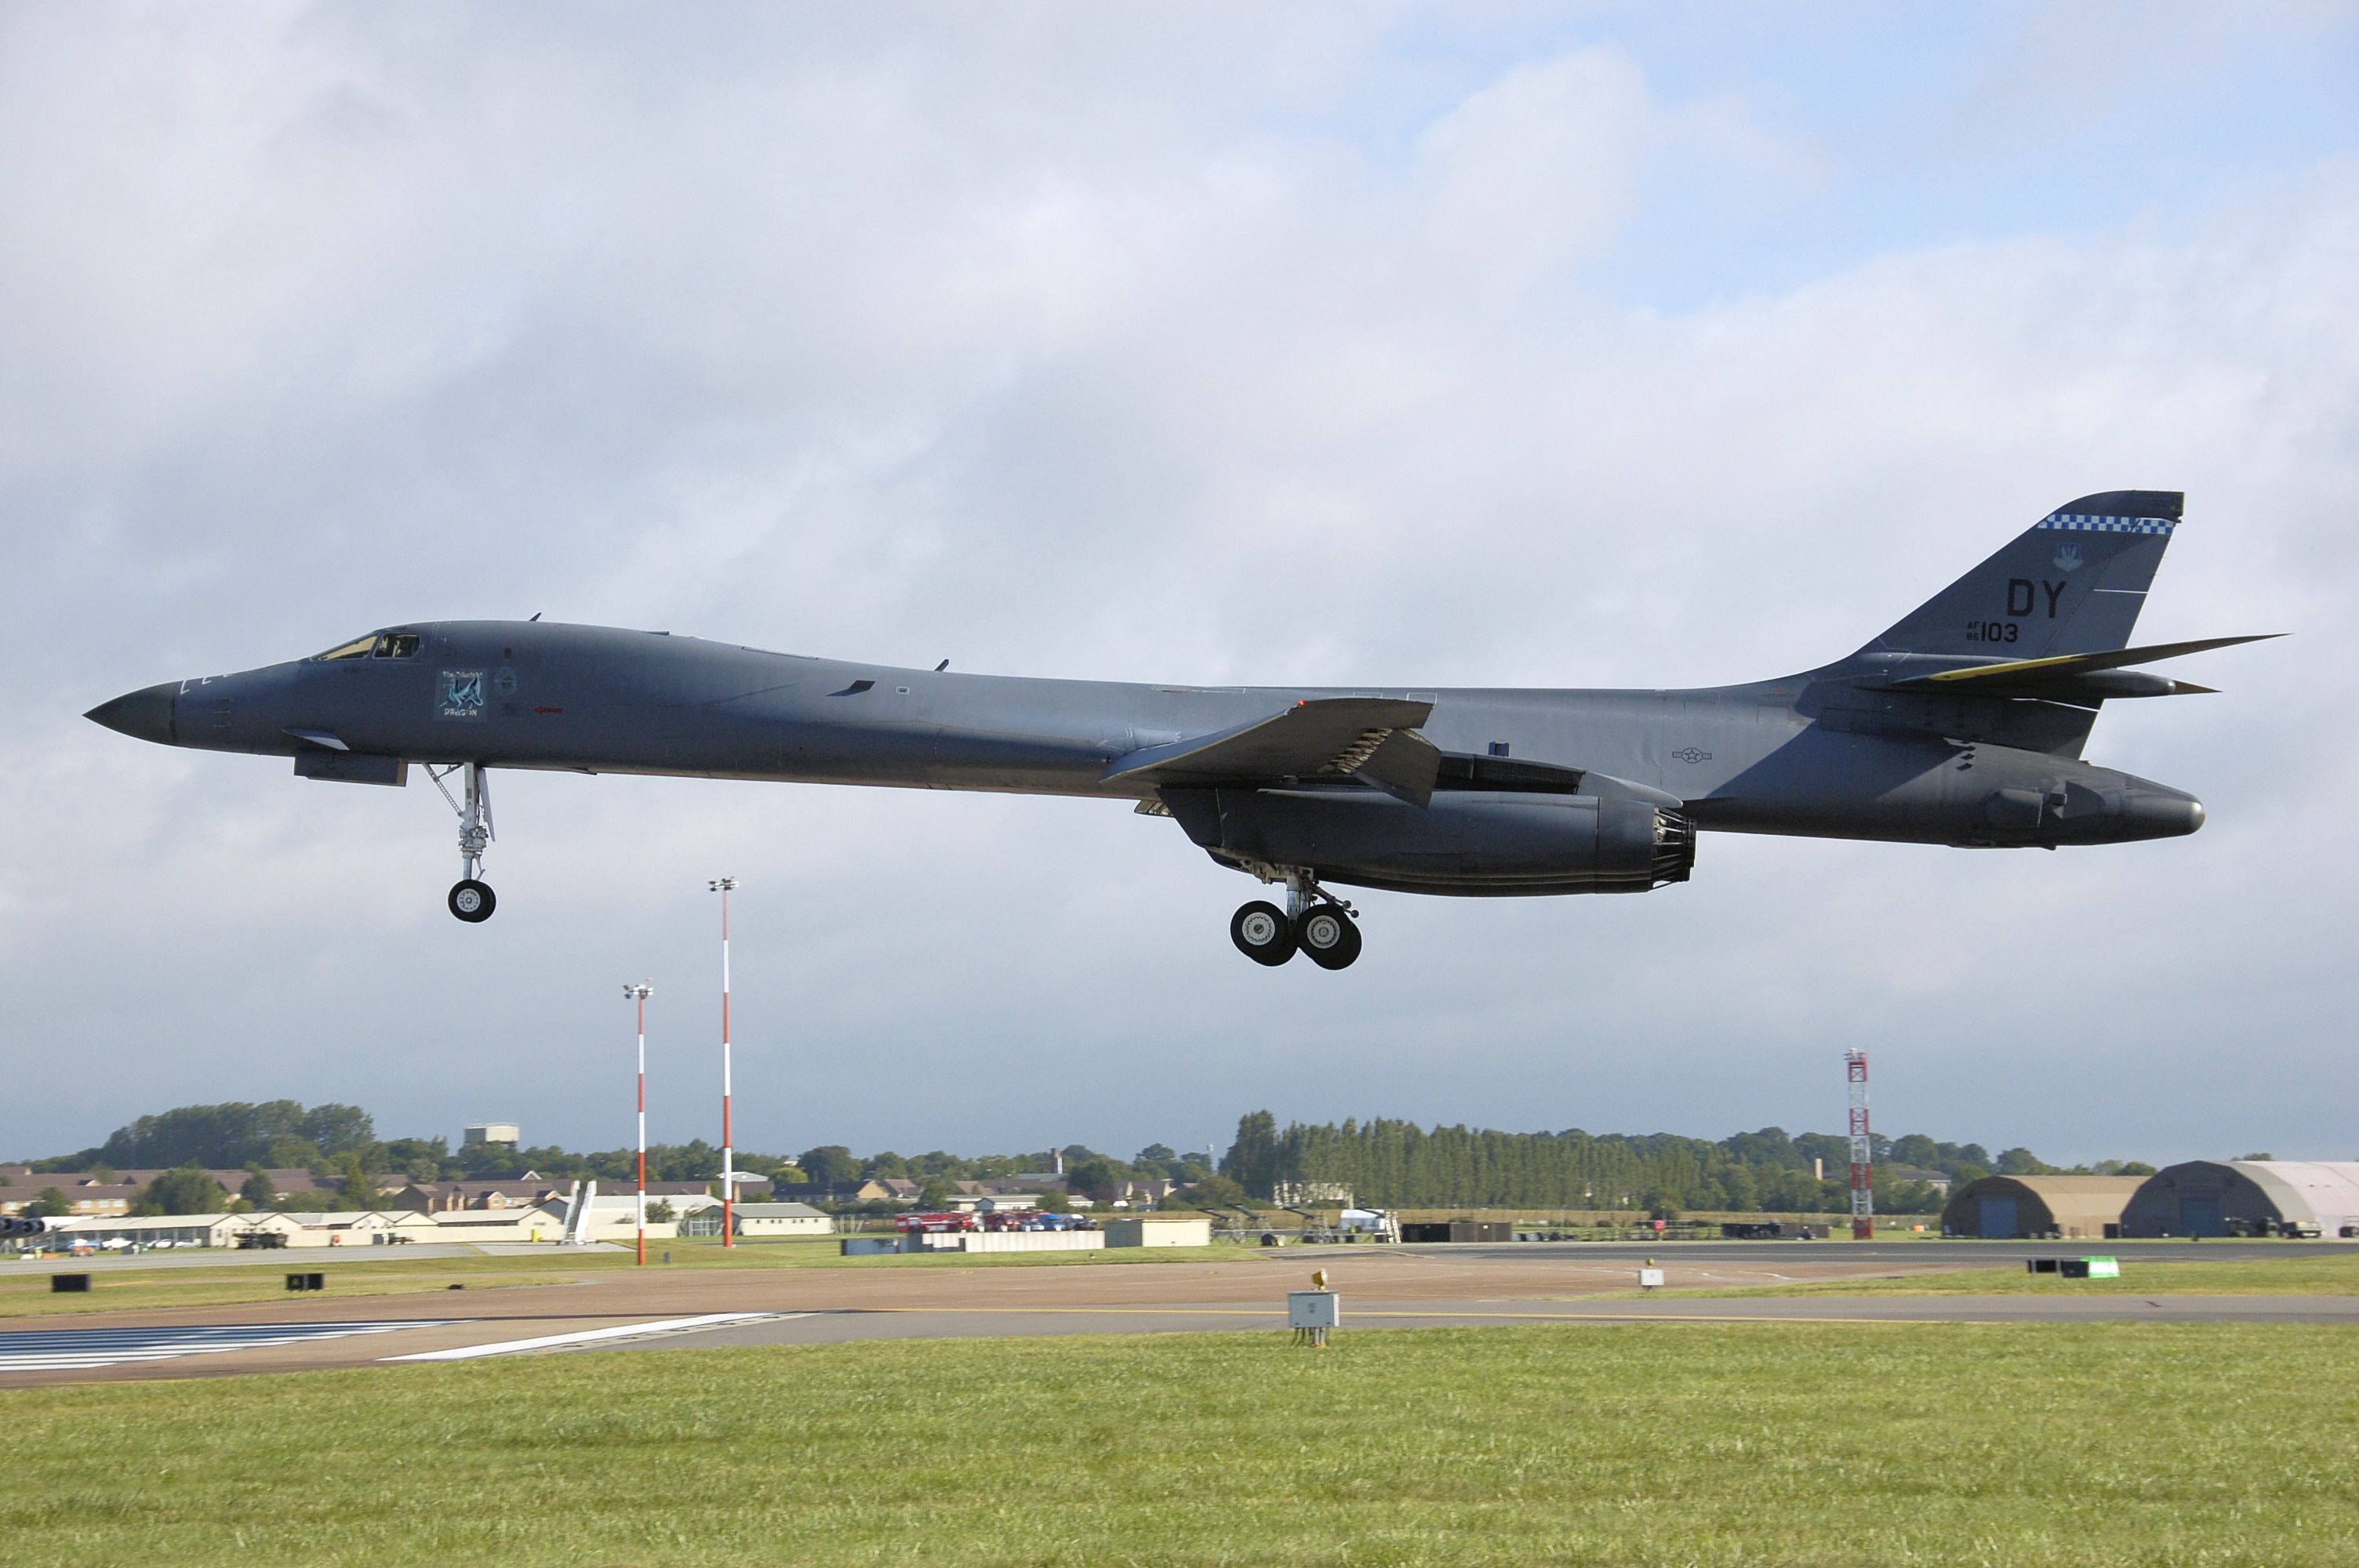 A Rockwell B-1B Lancer coming in for landing.